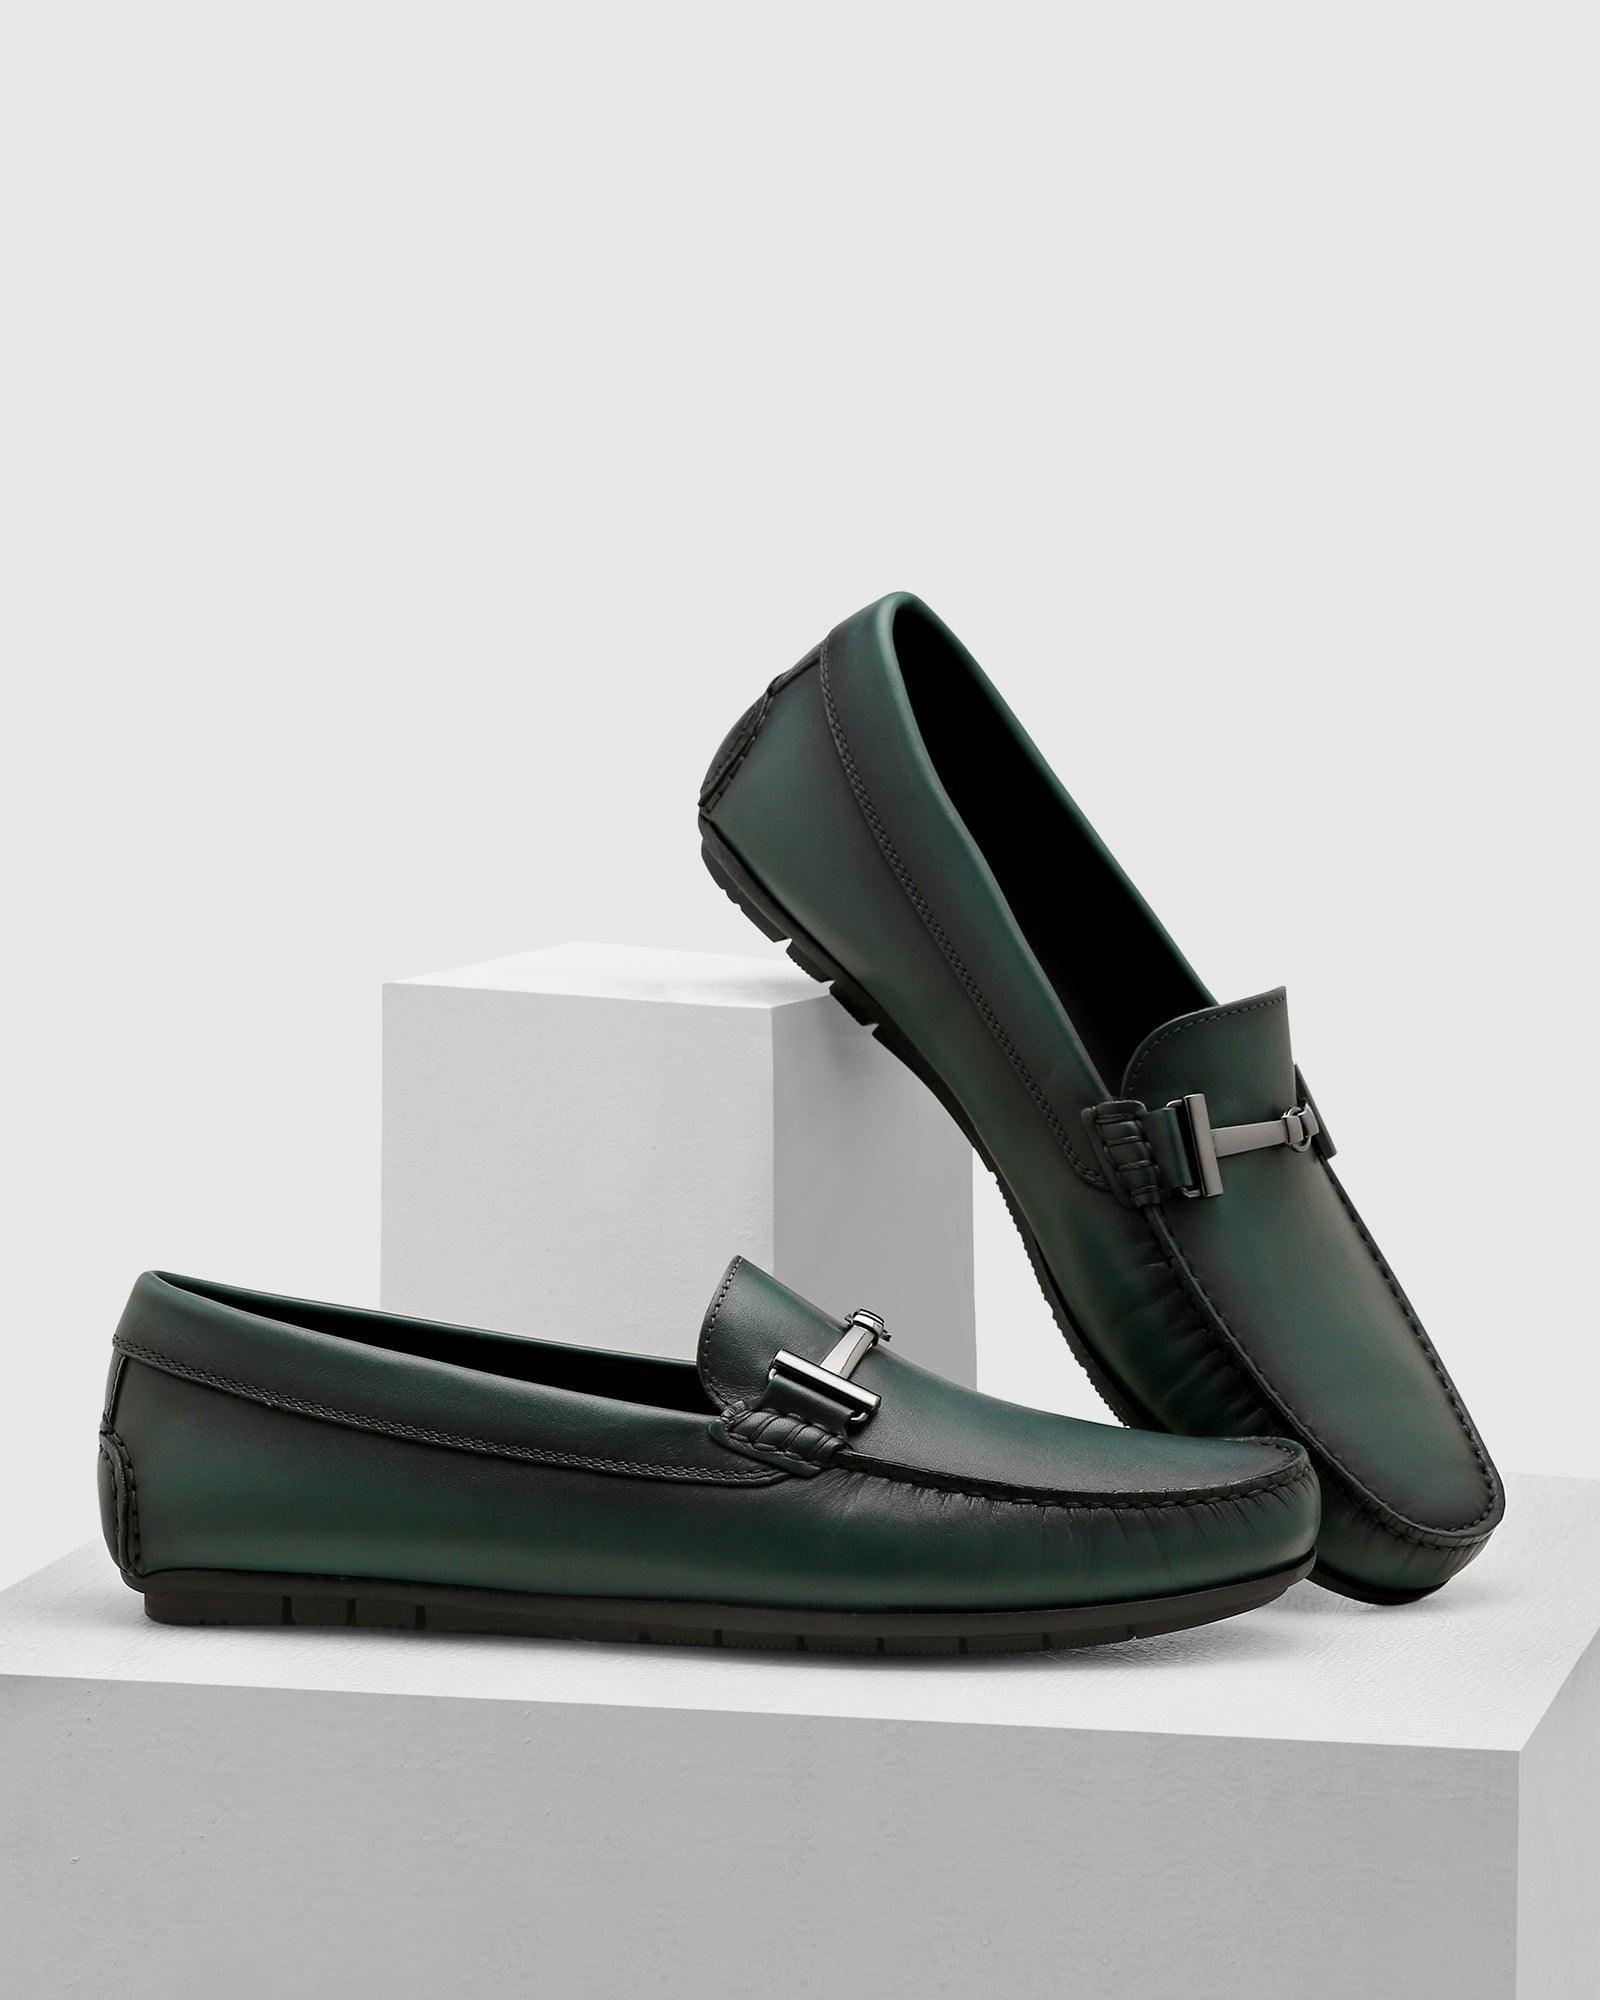 leather loafers shoes in dark green (qanali)